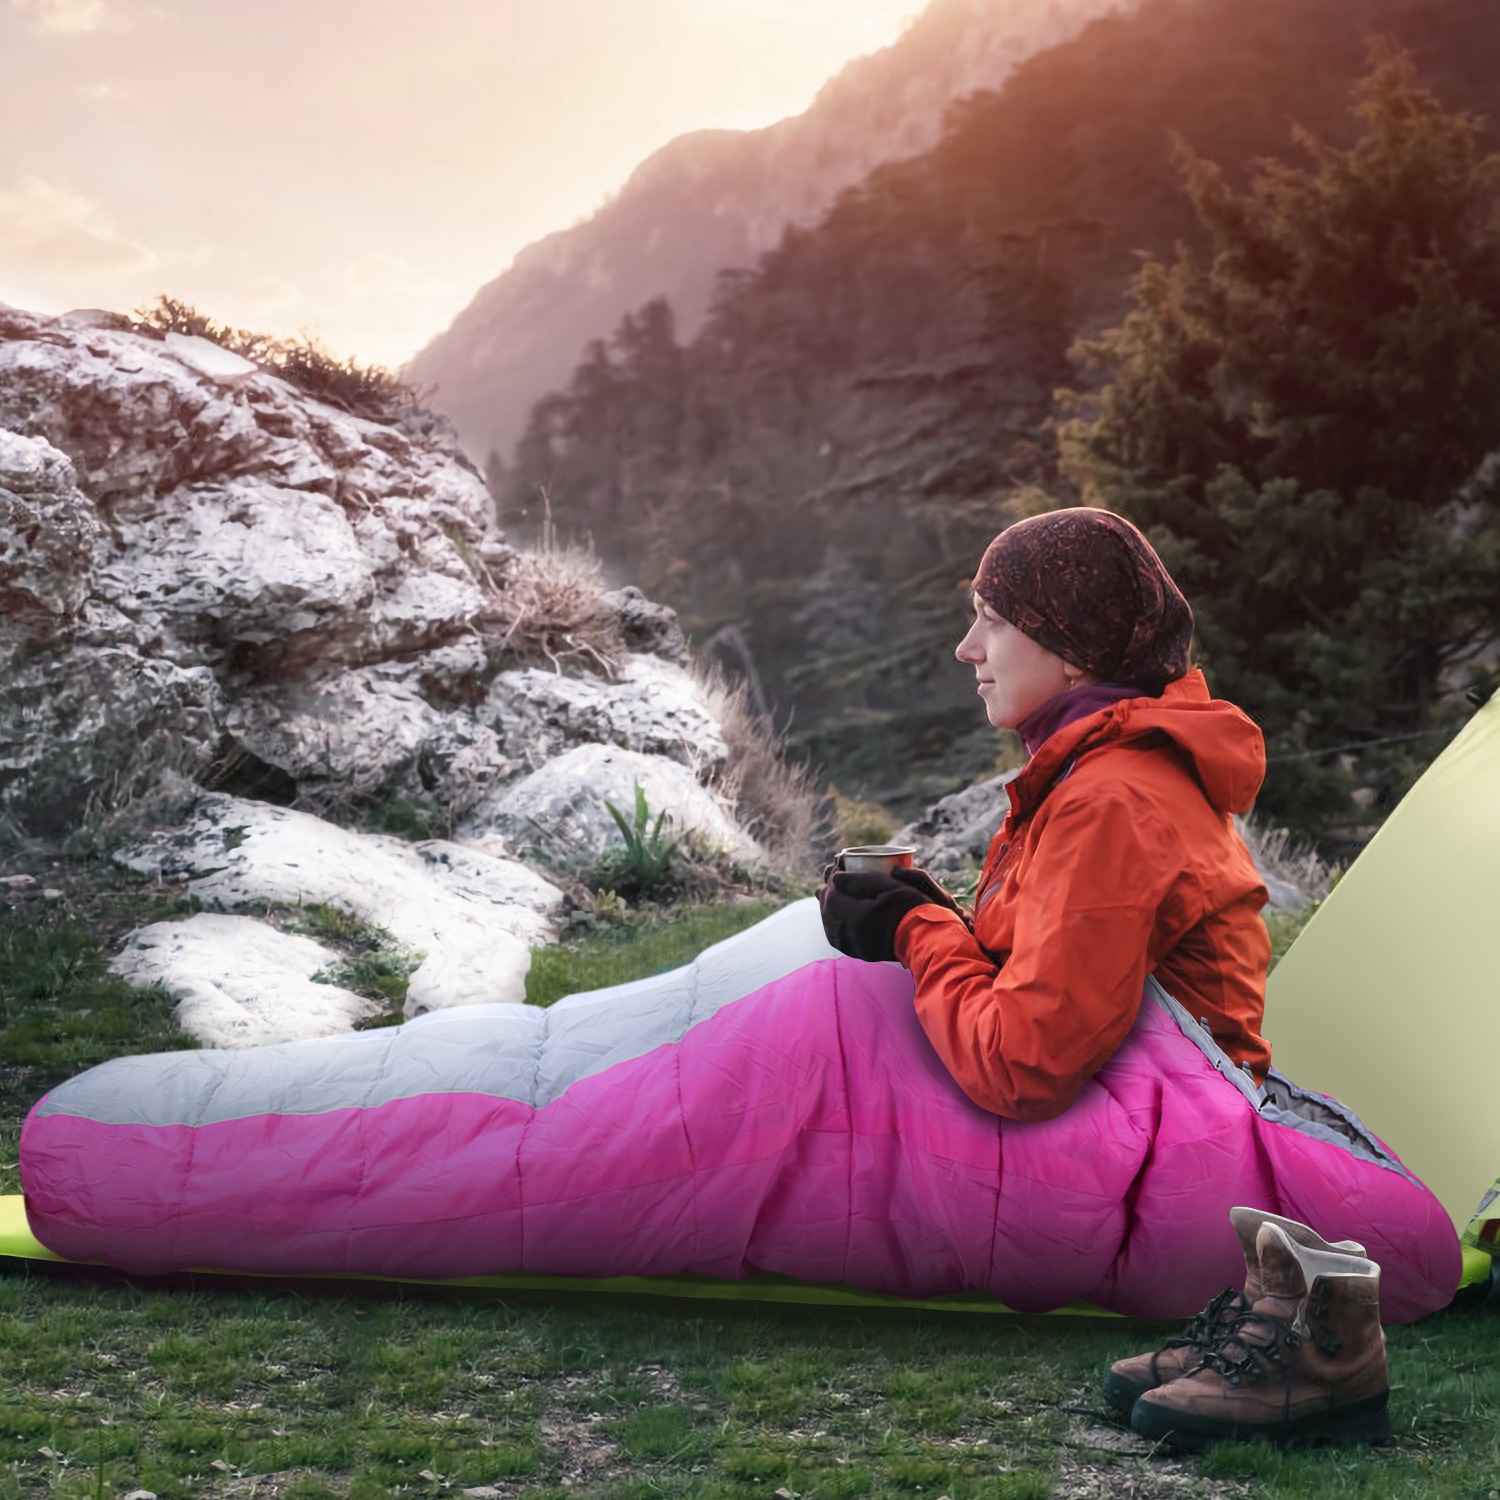 Women’s sleeping bag – What types of bags are there